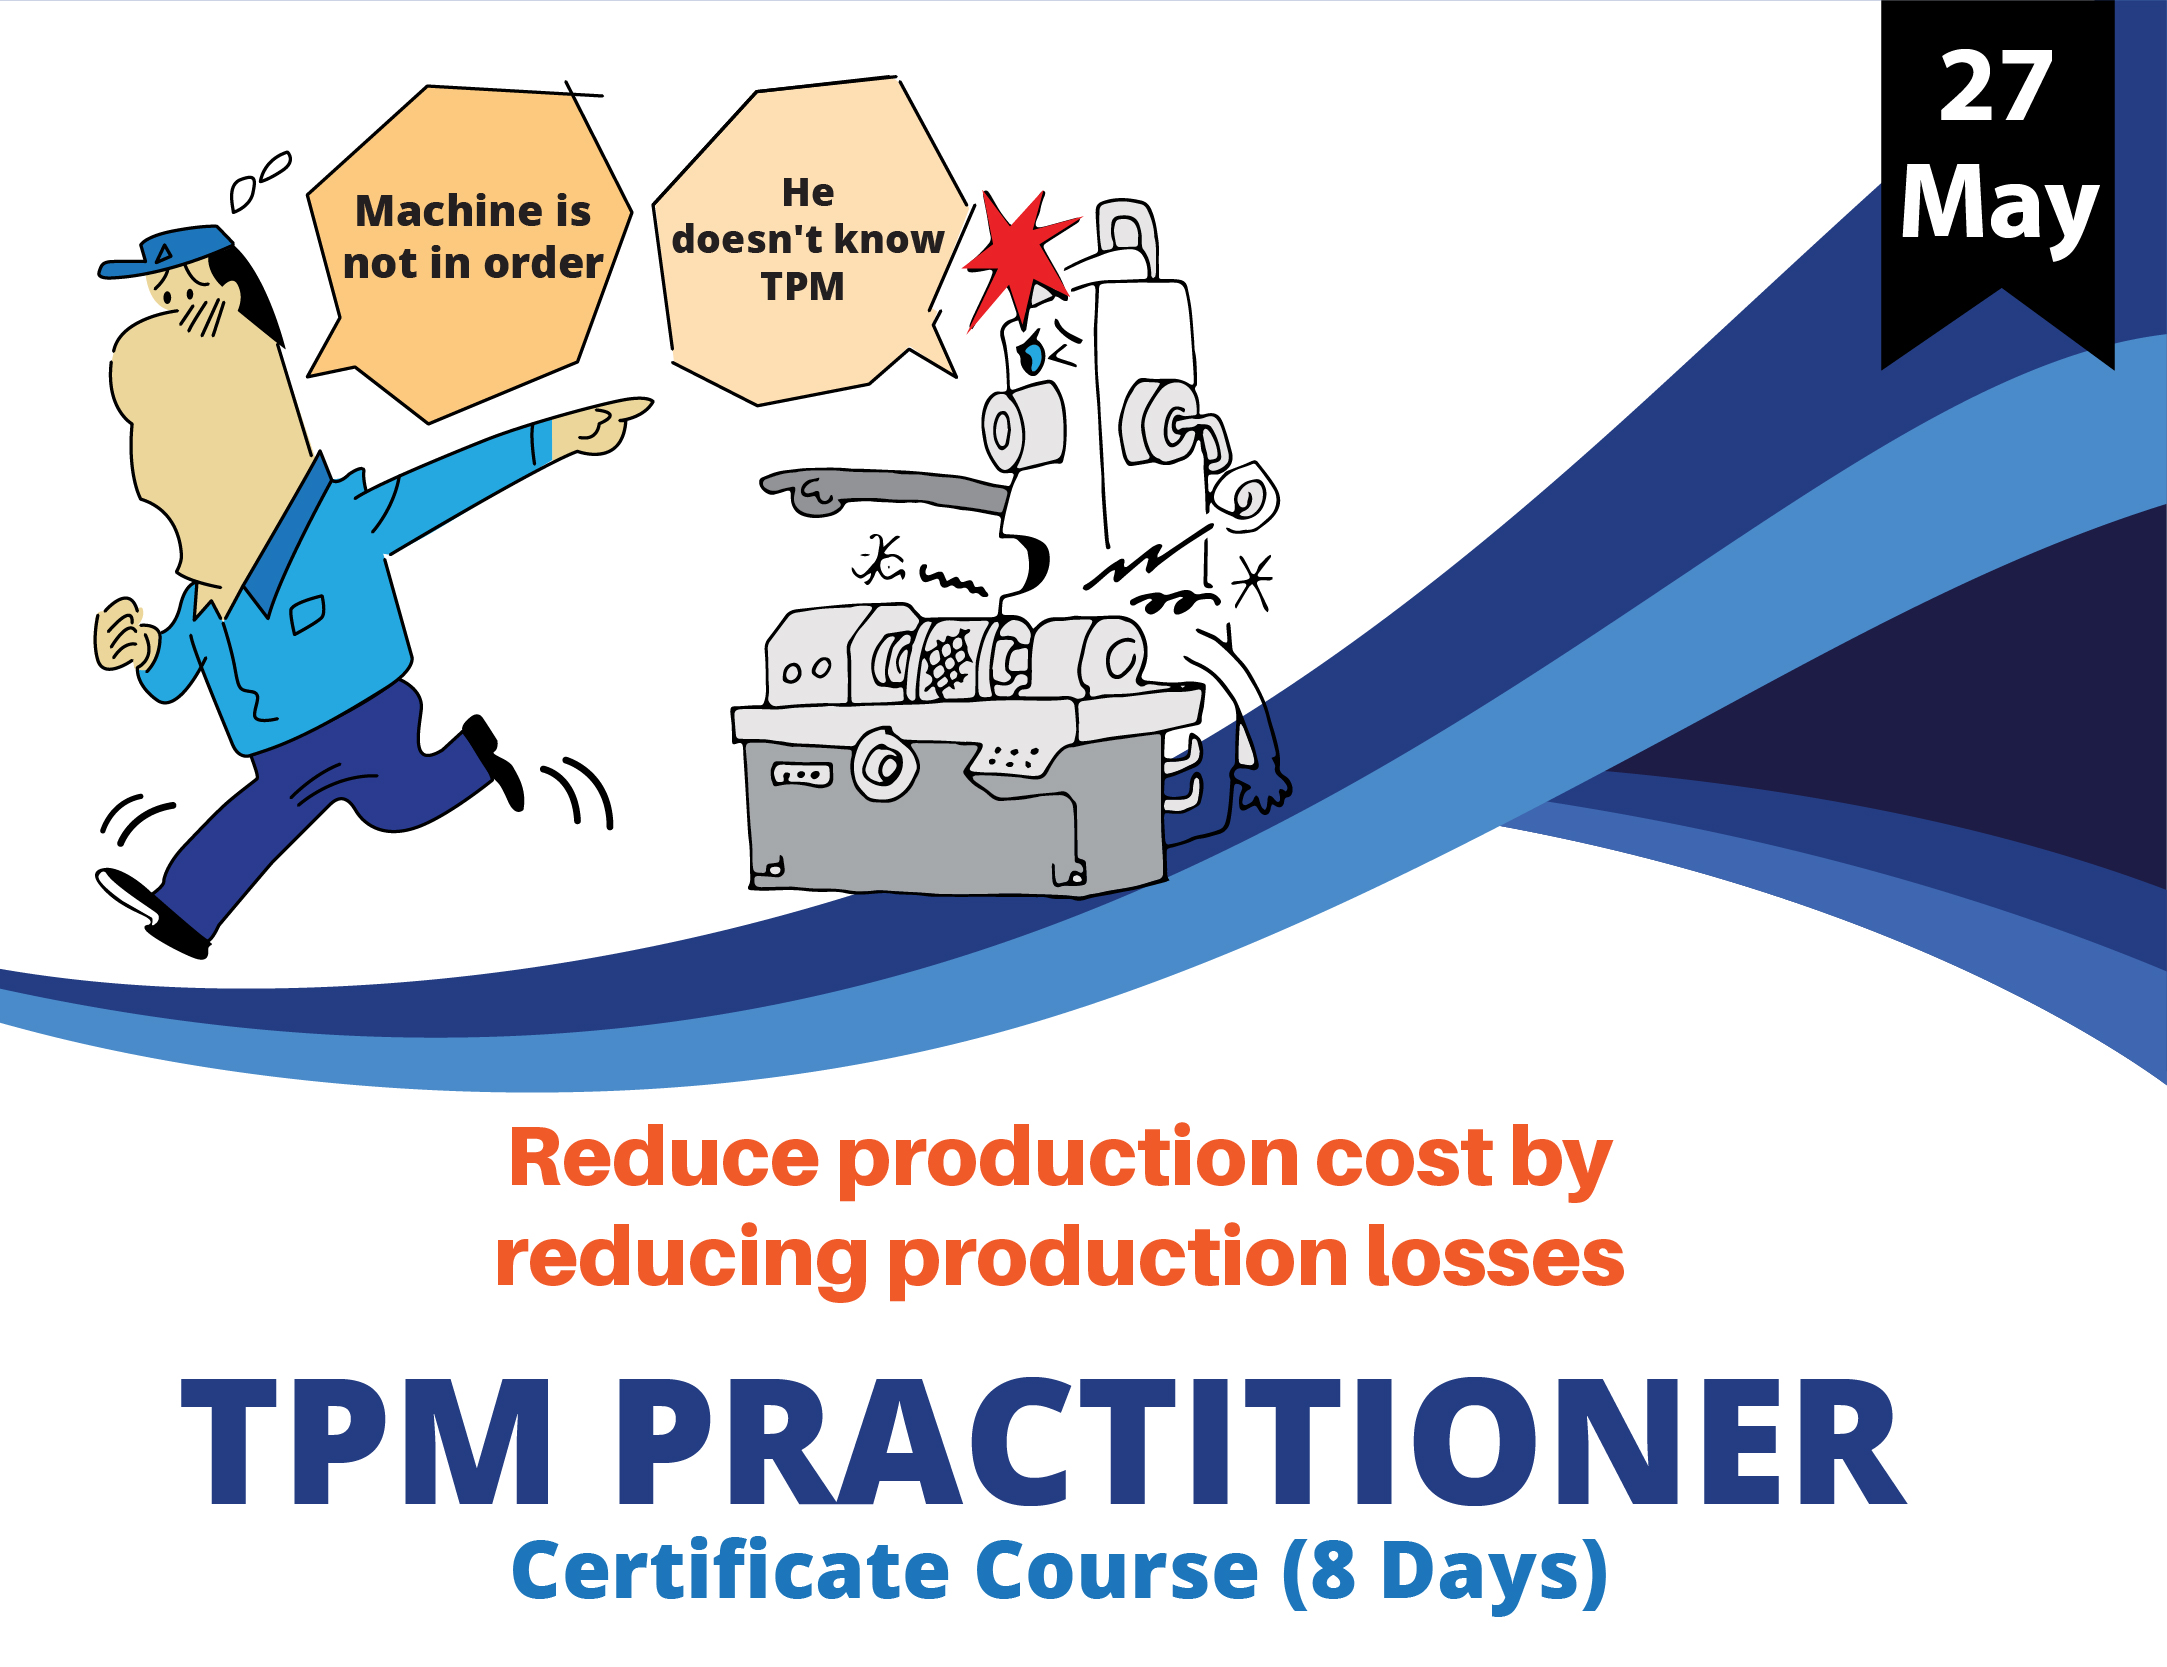 TPM Practitioner Certificate Course